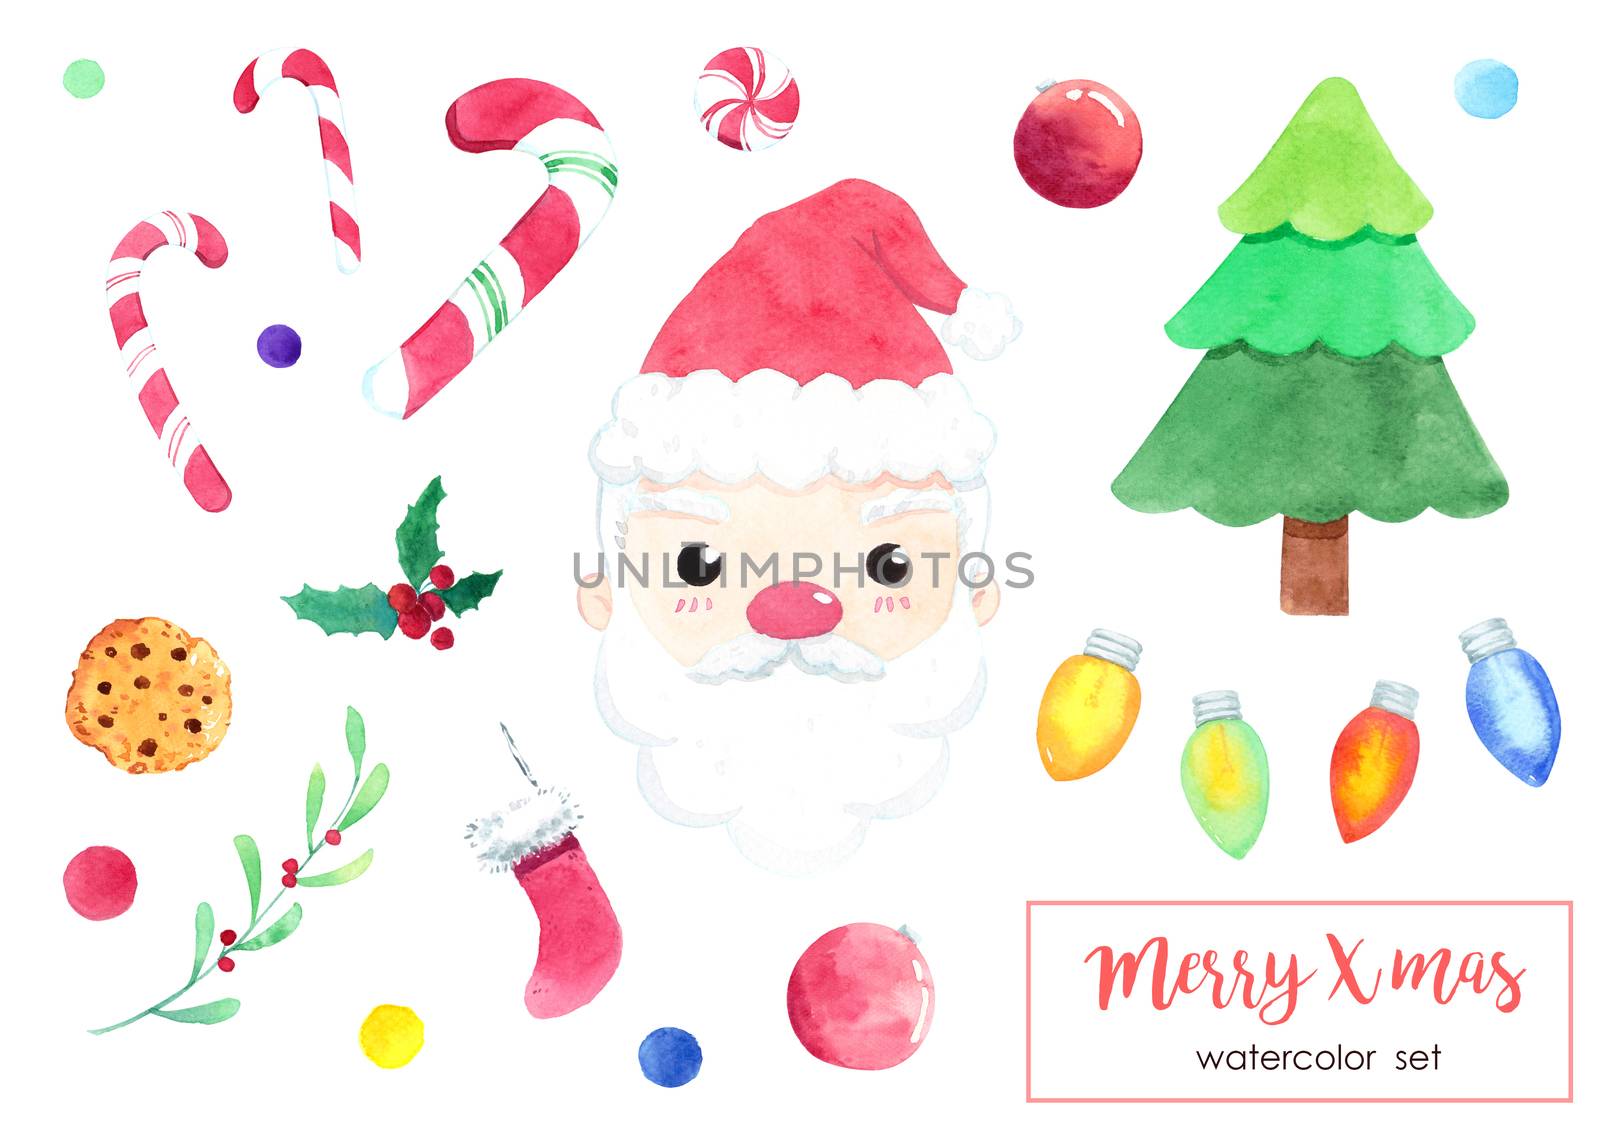 Cute watercolor Christmas objects set: Santa Claus, Fir tree, ball, sweet, sock, holly berry, fairy lights icon. Xmas decorative elements isolated on white background. Hand painted illustrations. Clipping path. by Ungamrung